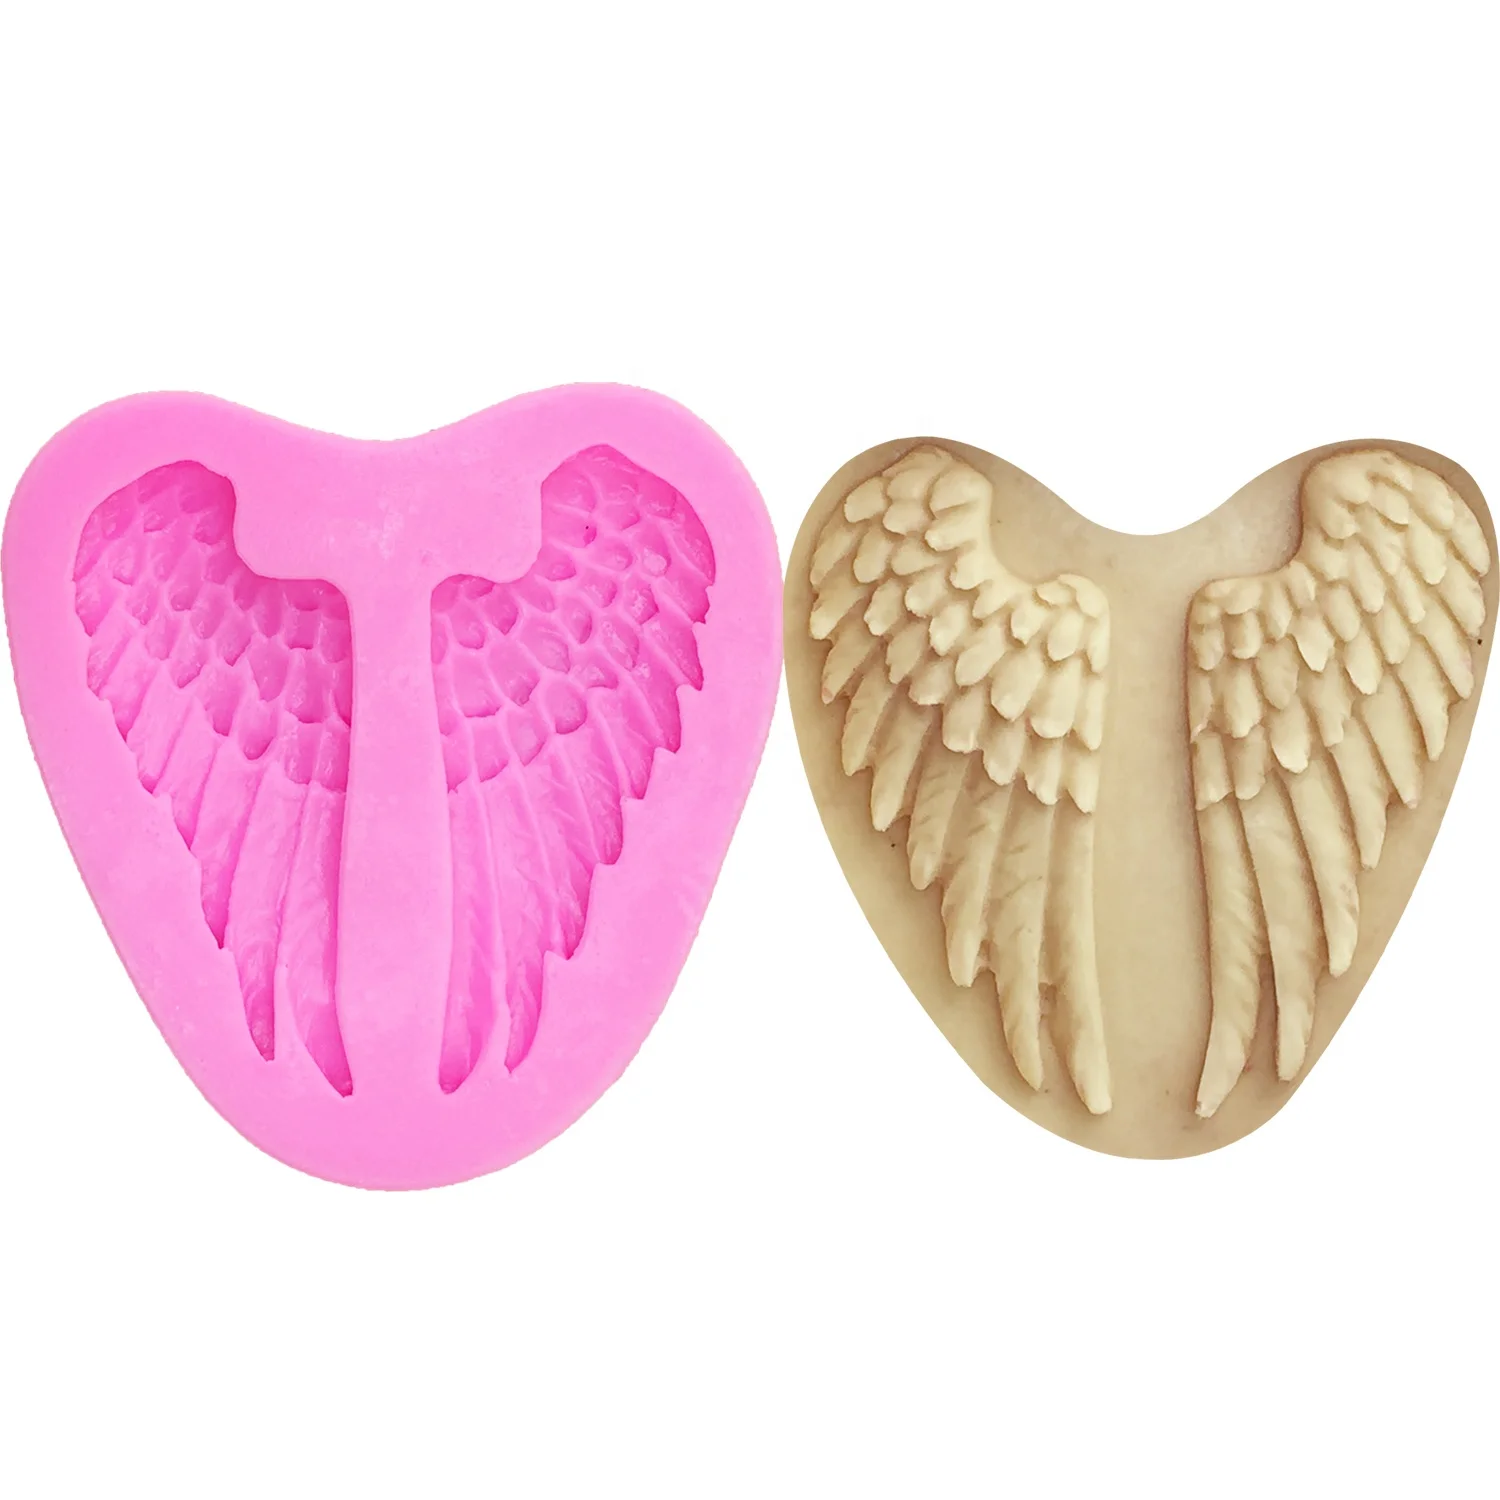 Cake Decorating Tools Angel Wings Shape Silicone Chocolate Mold Cake Molds Mould 